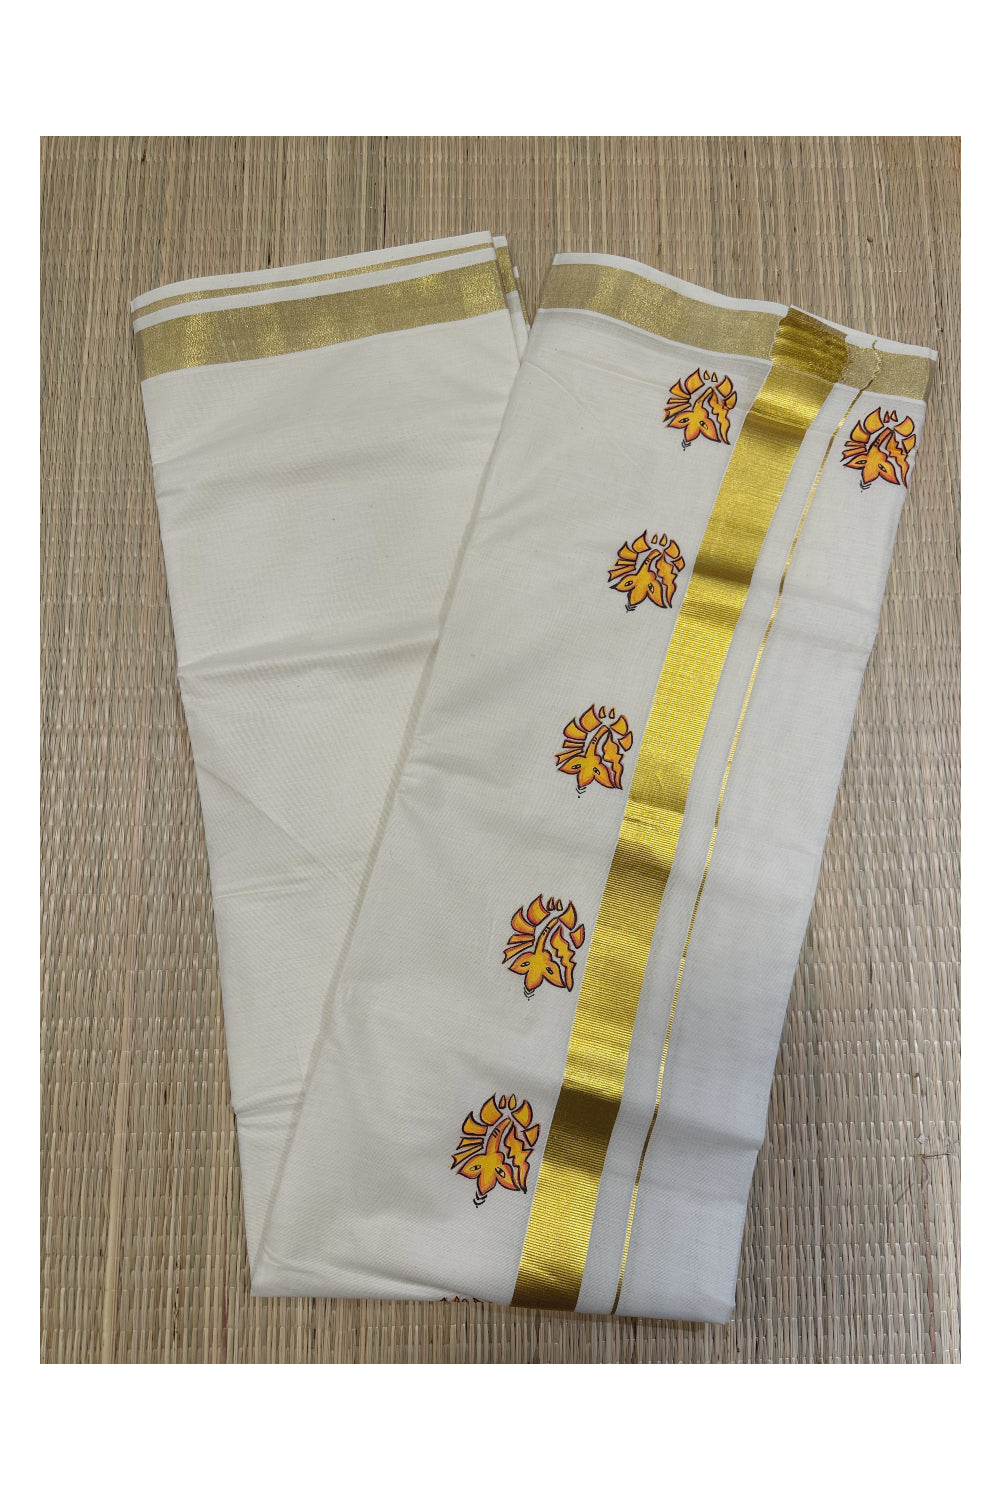 Off White Pure Cotton Double Mundu with Mural Hand Painted Design on Golden Kasavu Kara (South Indian Dhoti)